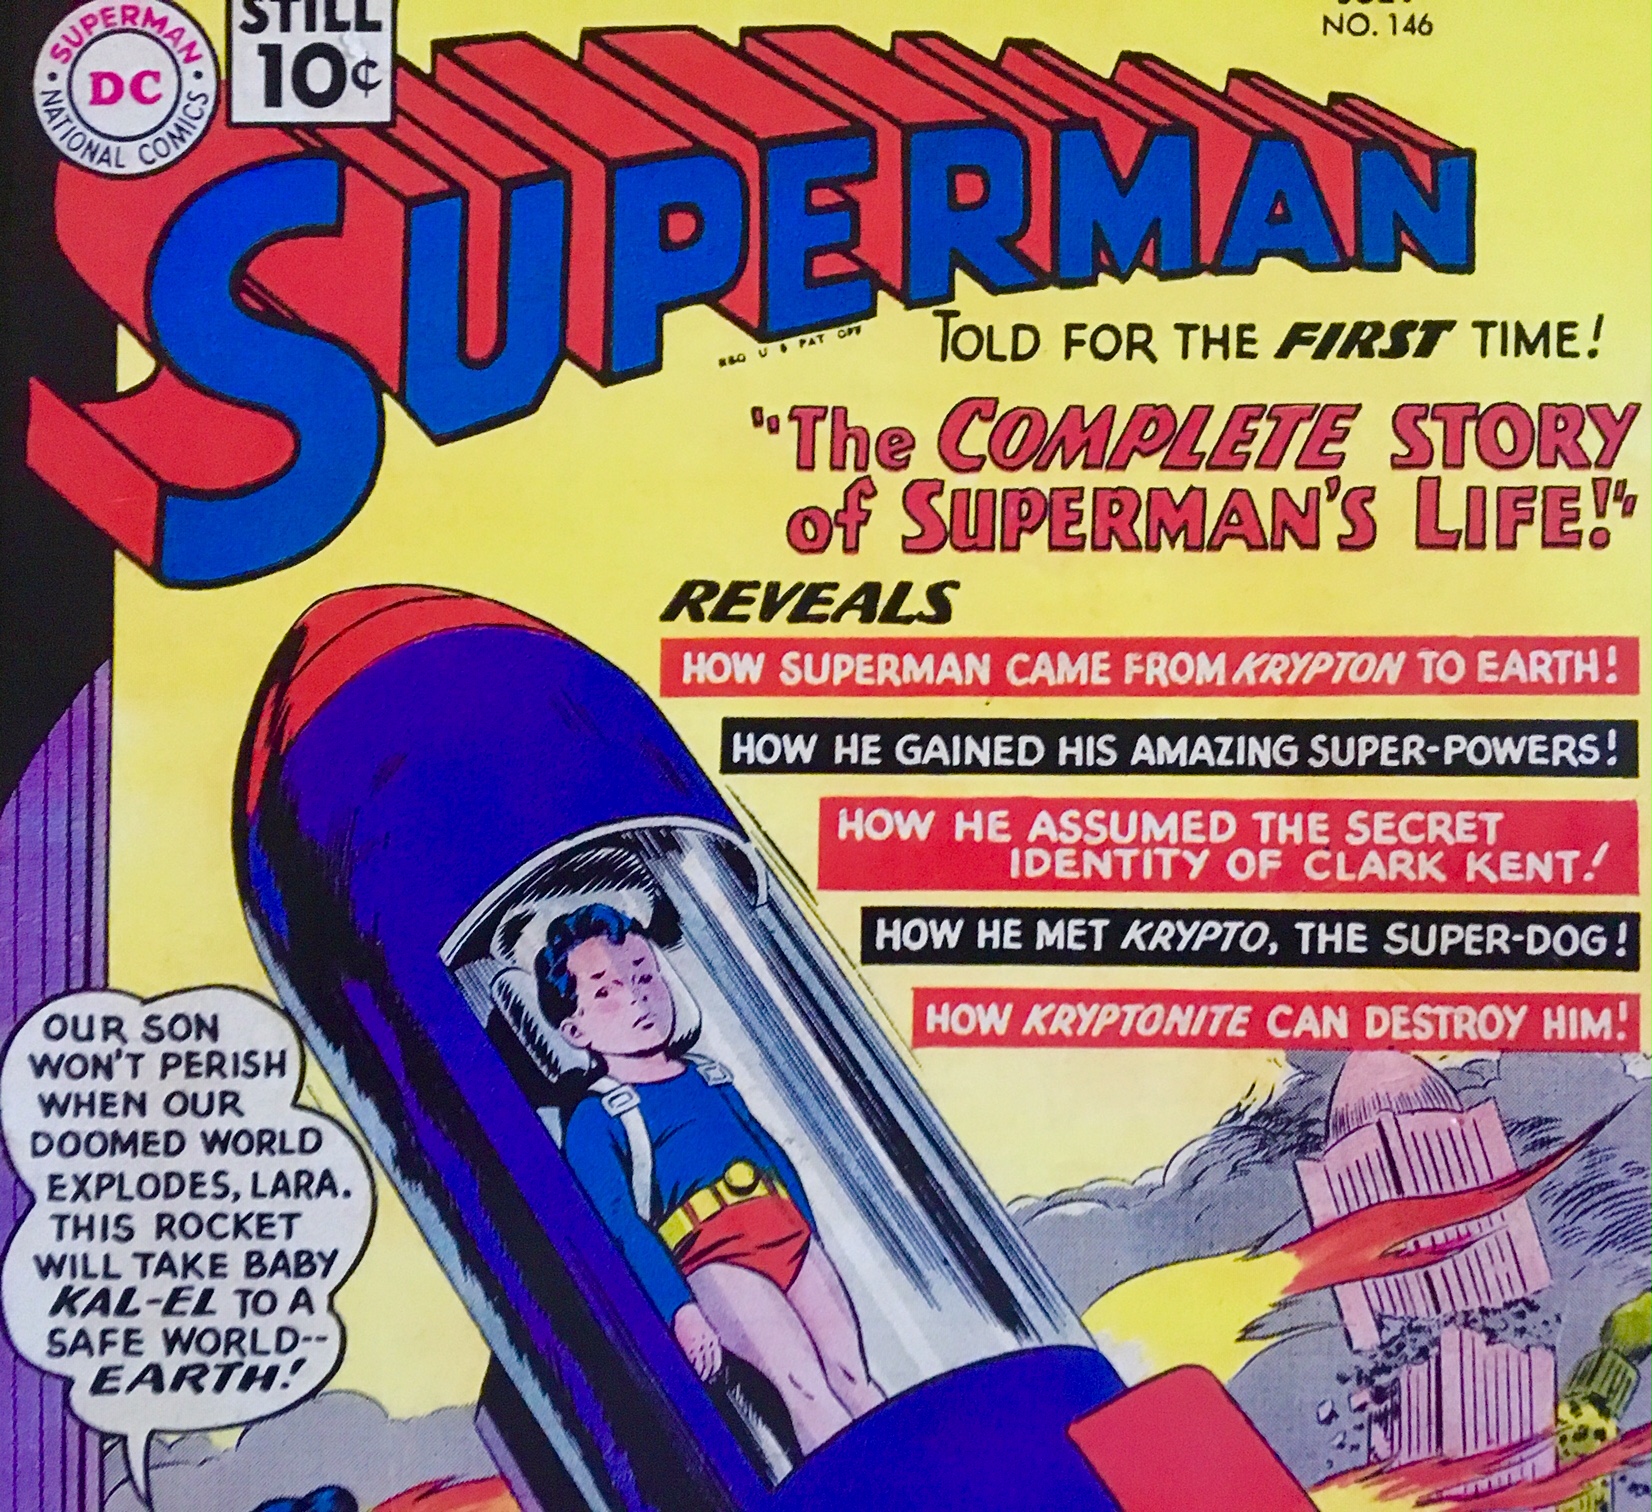 The Complete Story of Superman’s Life!